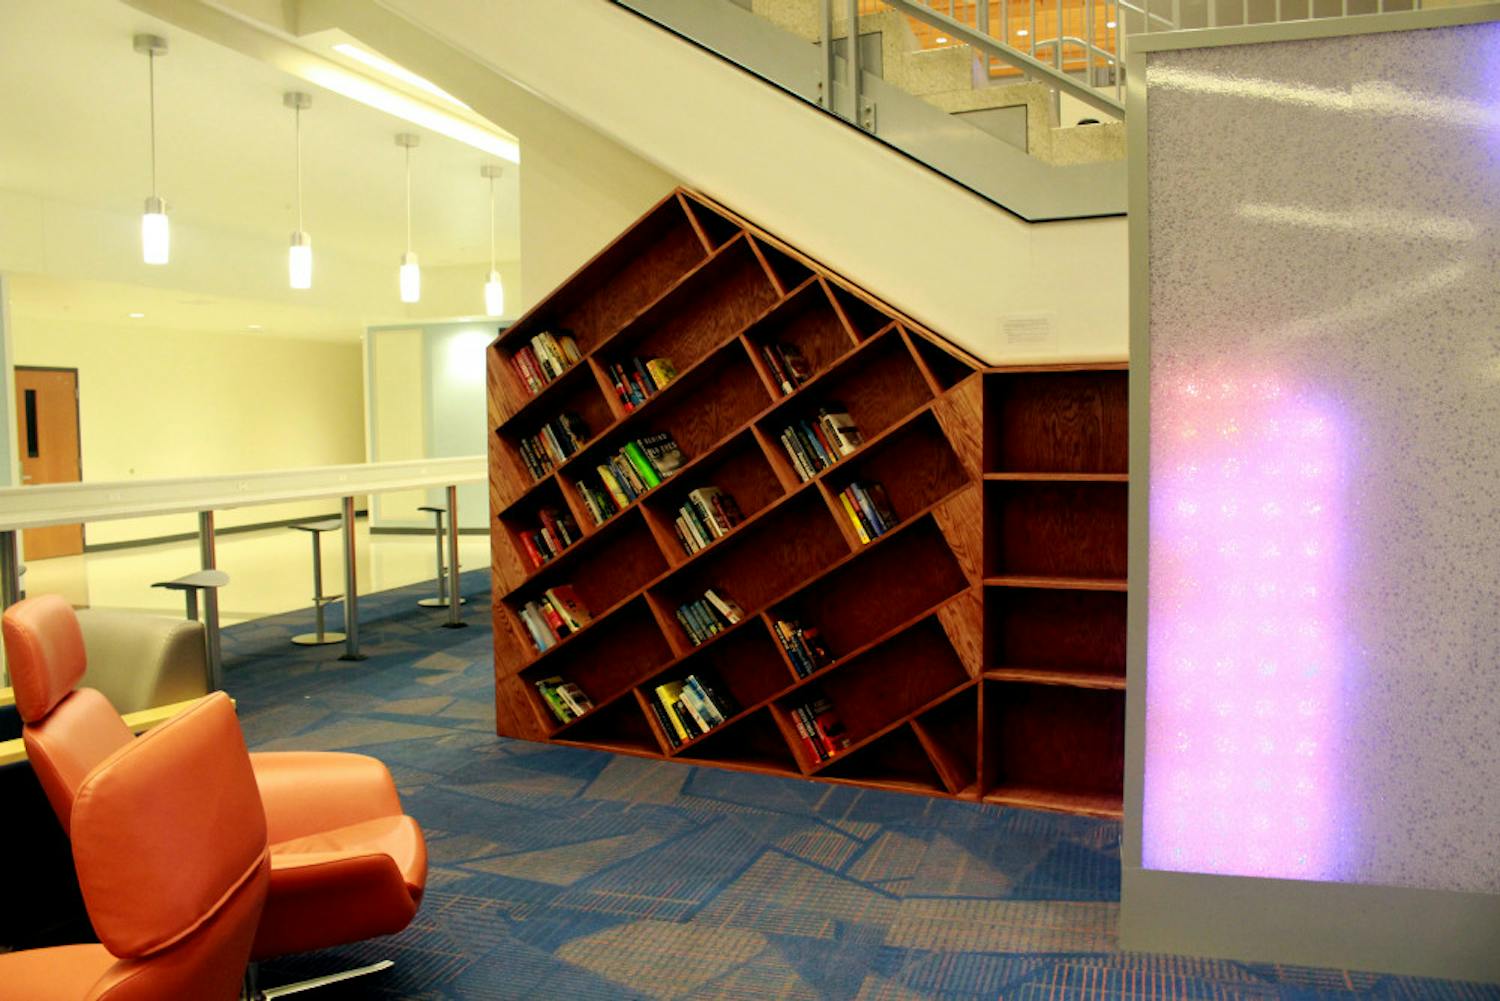 The Reitz Union’s free library opened Jan. 2 and can be used by anyone. It includes titles from authors such as Tom Clancy, Anthony Horowitz, Carl Hiaasen and James Patterson. 